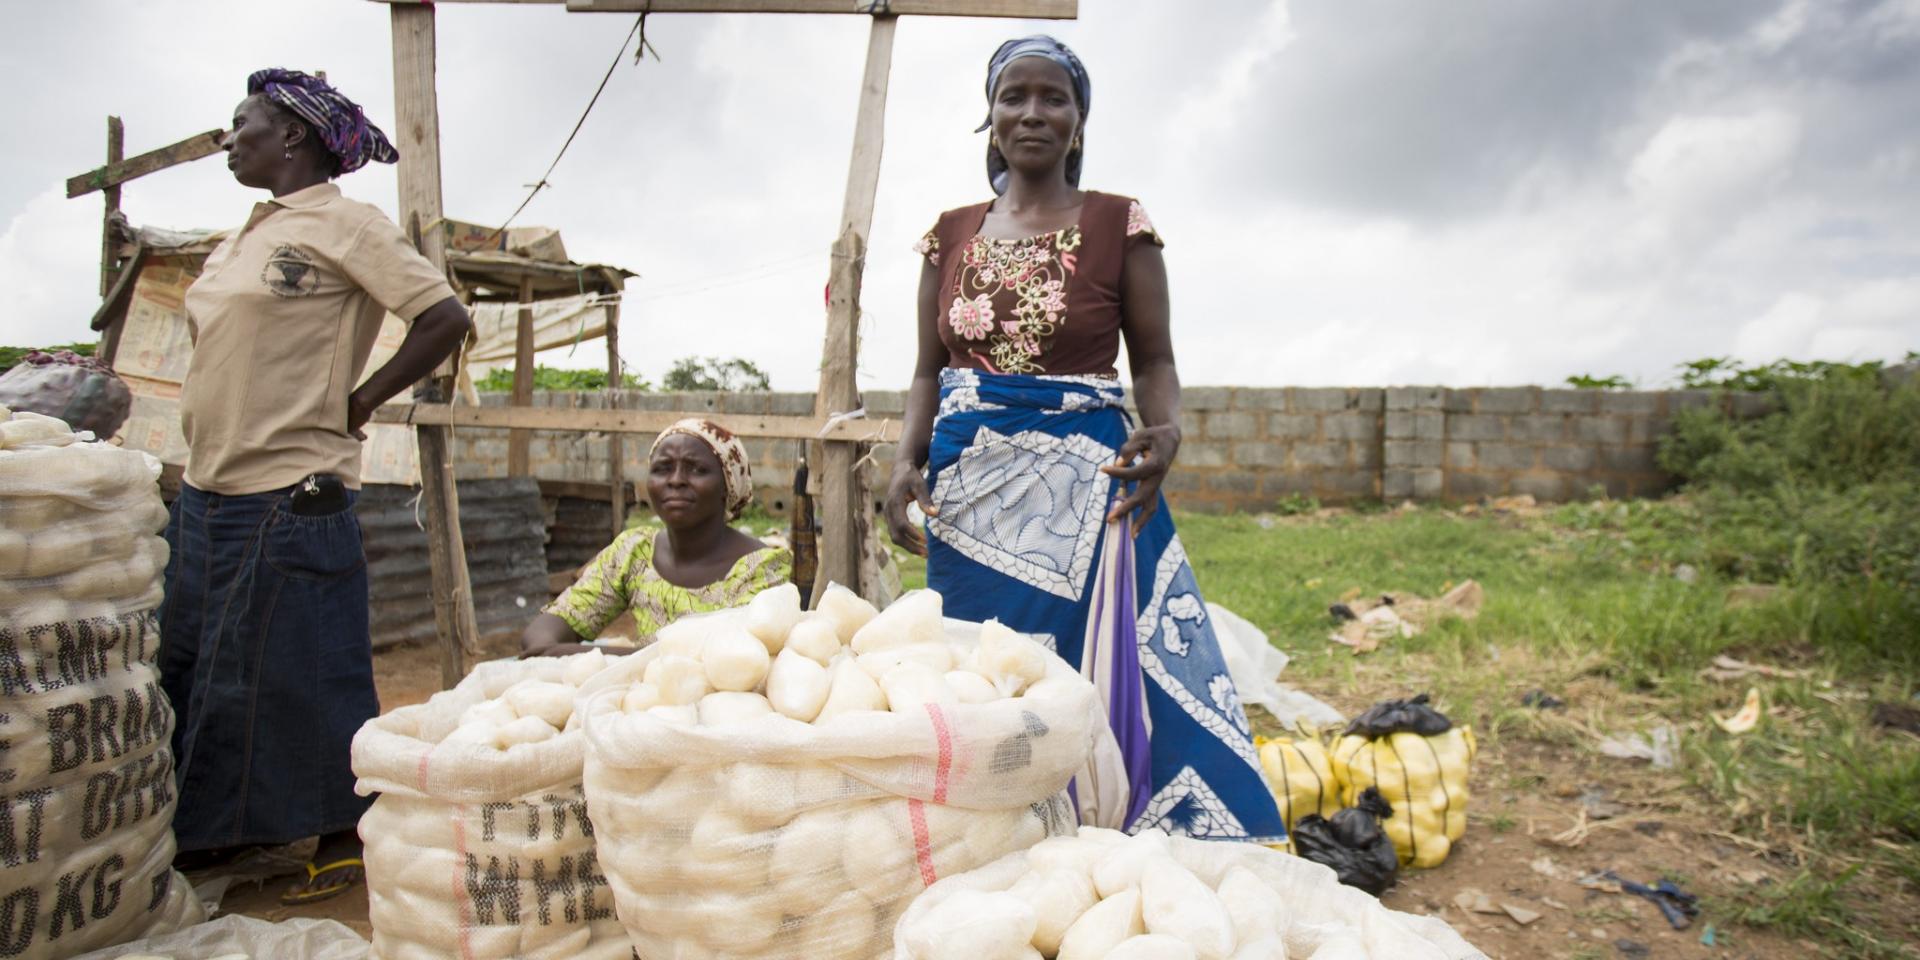 Woman sells fufu in a marketplace, Abuja - a staple food of many African and Caribbean countries. It is often made with a flour made from the cassava plant. Photo: Milo Mitchell/IFPRI.